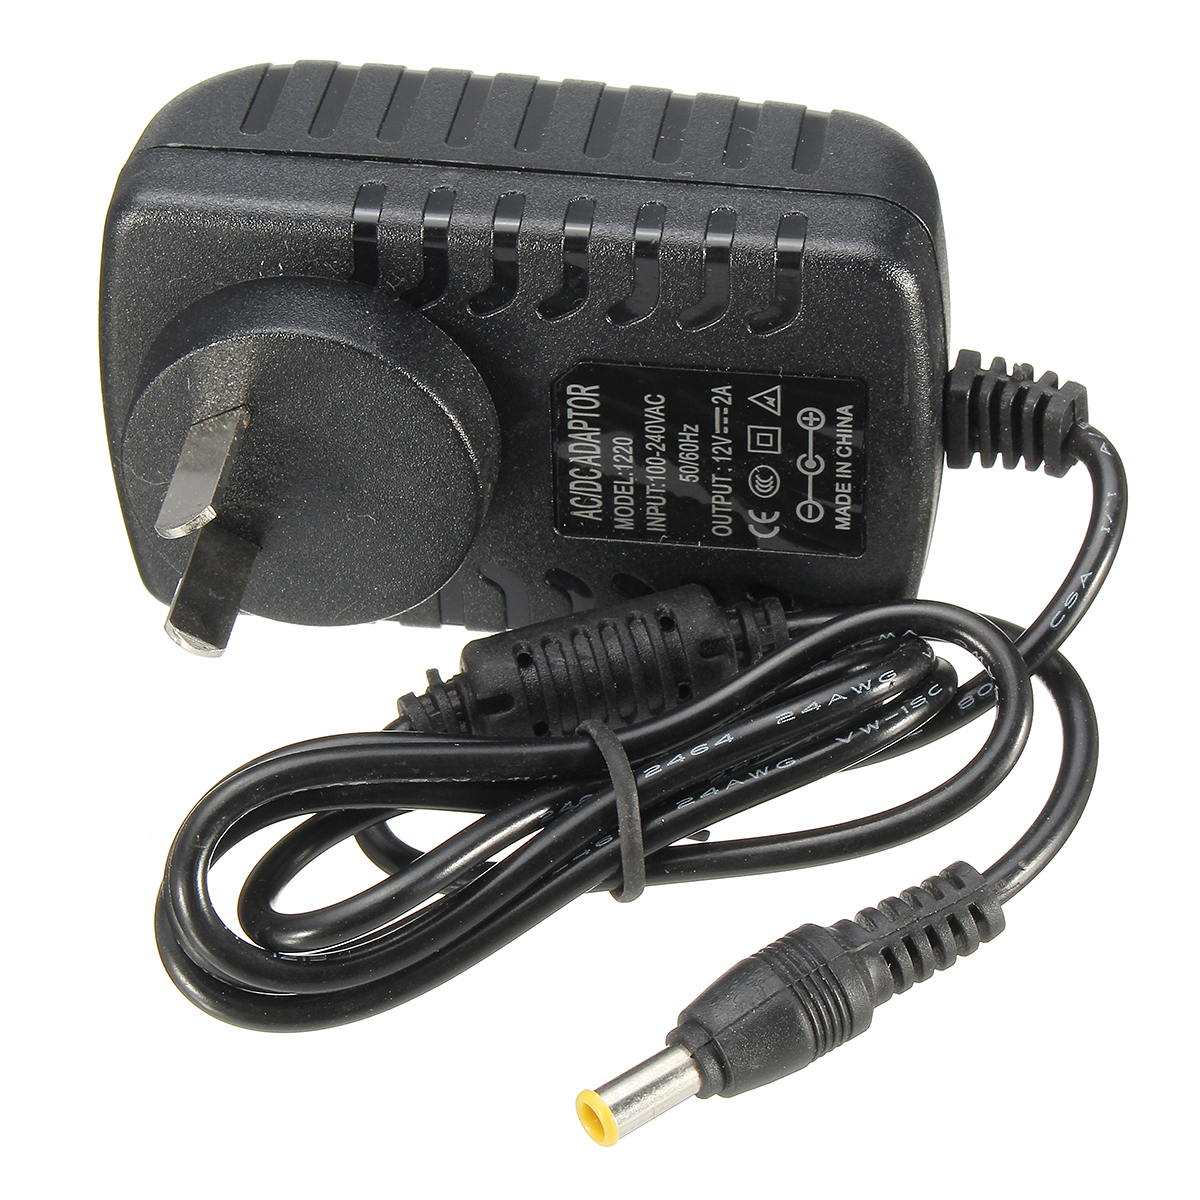 12V-2A-Adapter-for-Makita-BMR100-BMR101-JobSite-Radio-Switching-Power-Supply-Cord-Wall-Plug-Charger-1363818-4